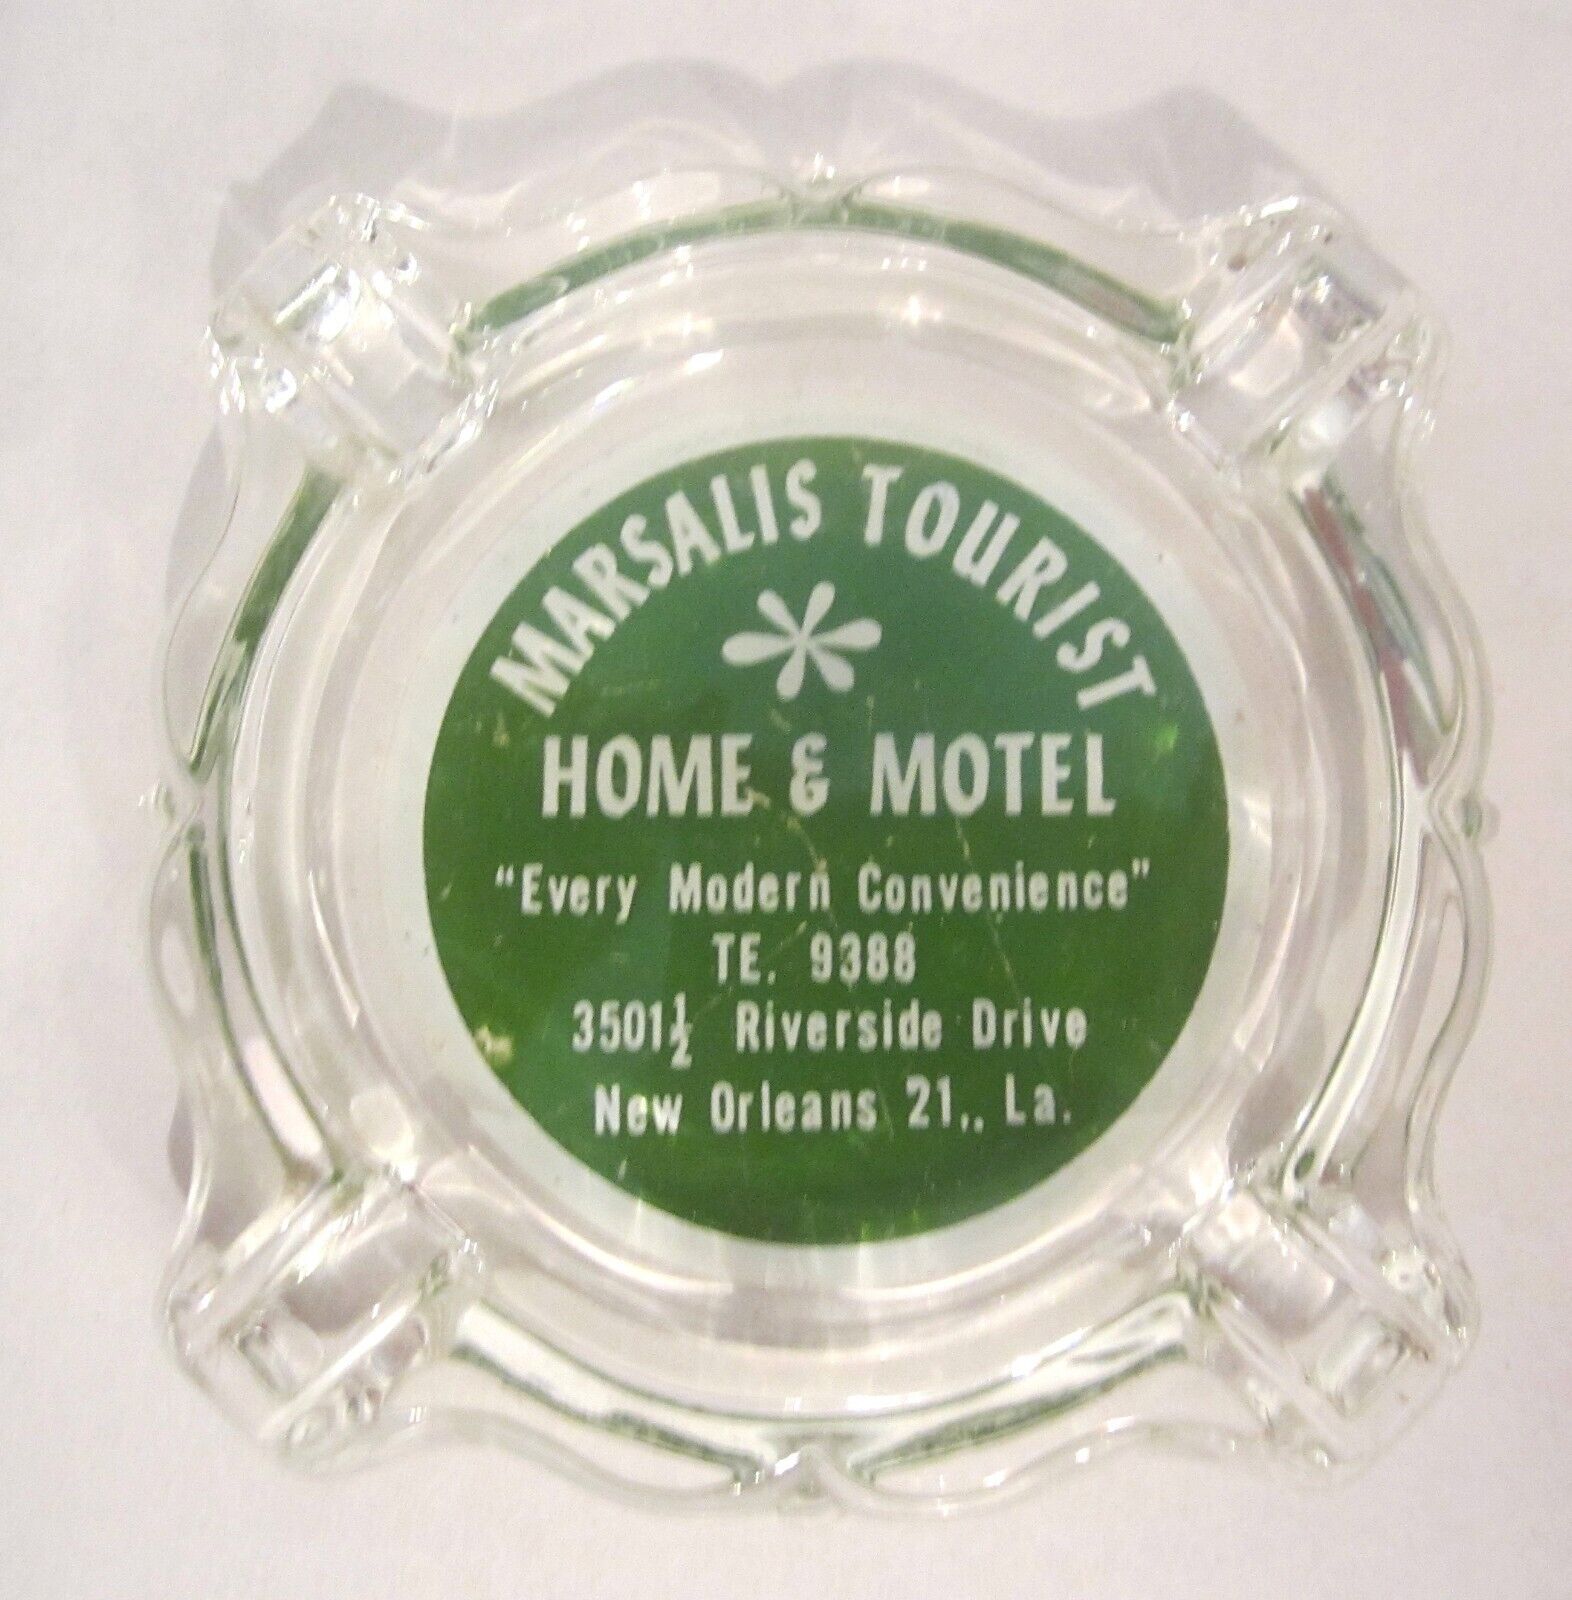 Marsalis Tourist Home and Motel Historic African American New Orleans Louisiana